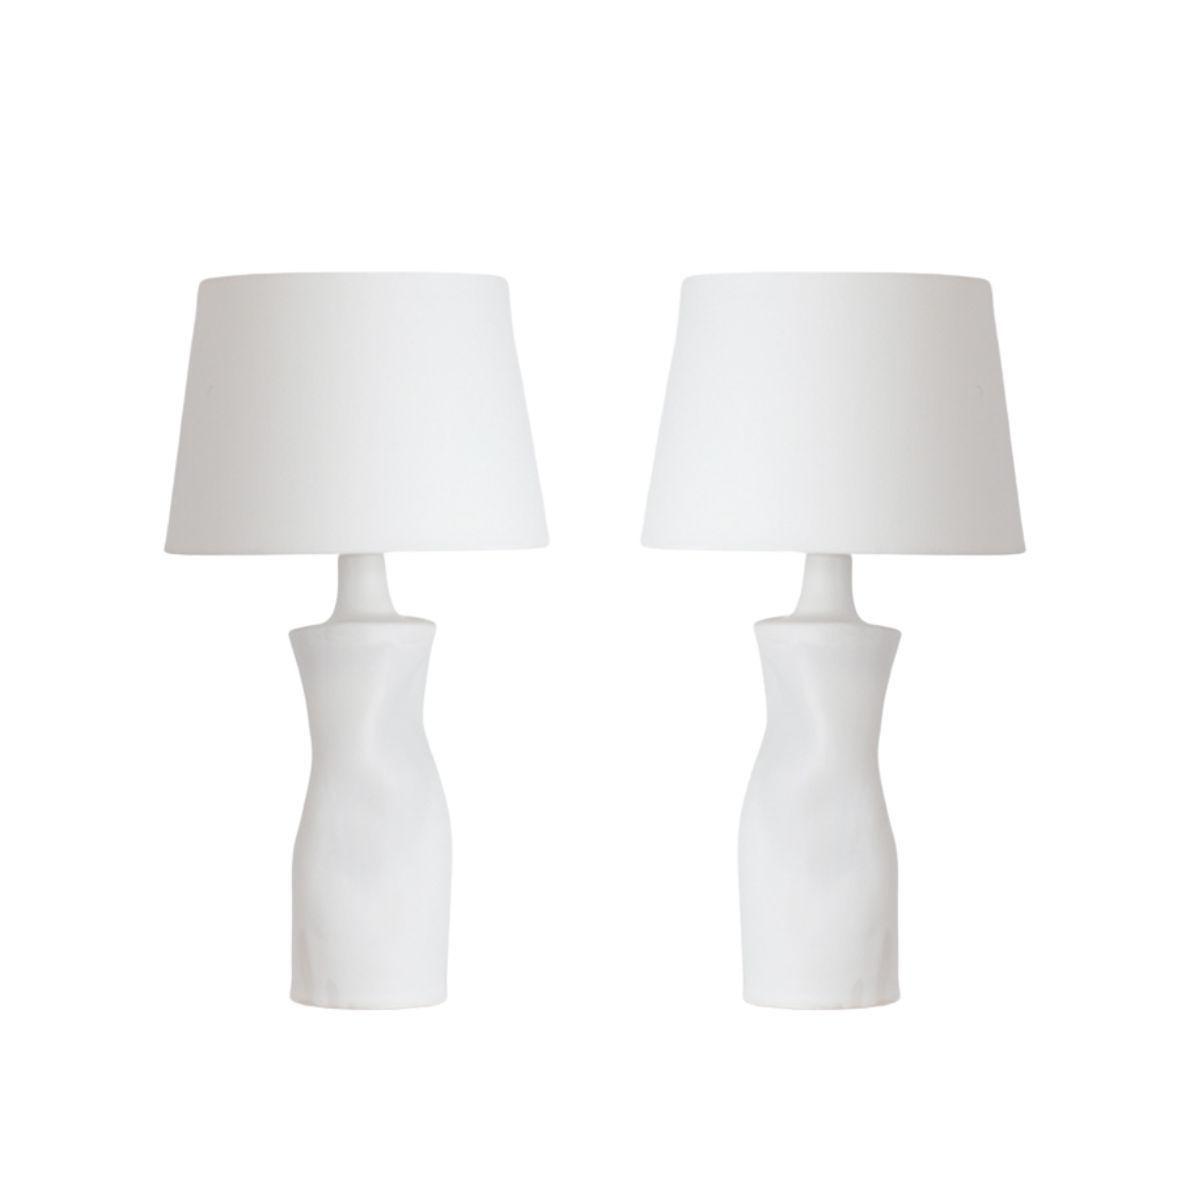 'Difforme' white ceramic table lamps with parchment shades by Design Frères.

Wired with high-end twist cords and 3-way switches (on, half intensity, off).  40w filament bulbs are included in your order. The European style parchment shades (no harp